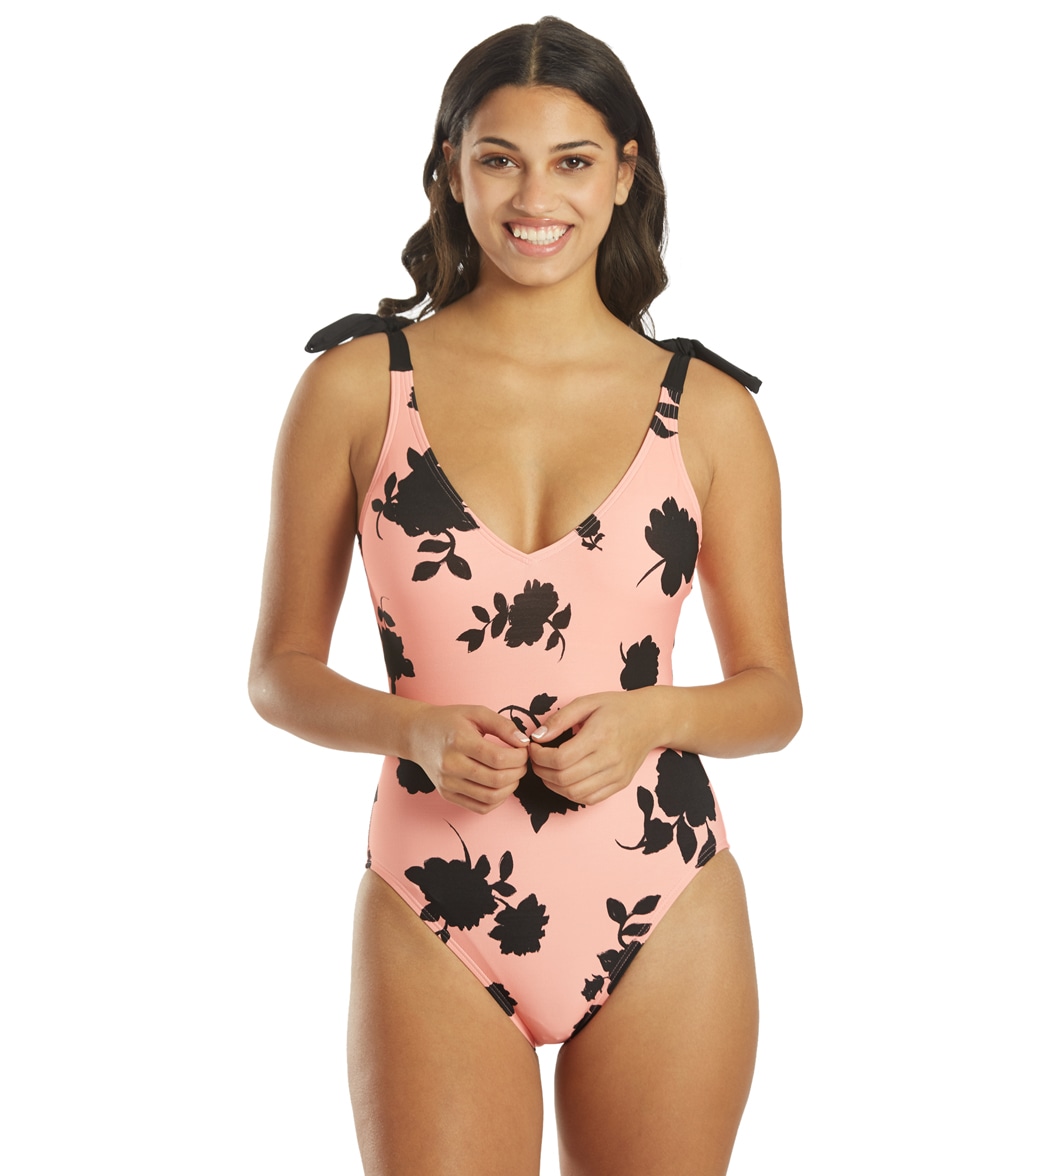 Kate Spade New York Women's Bicolor Floral Shoulder Bow Tie V Neck One Piece Swimsuit - Shell Pink Large - Swimoutlet.com